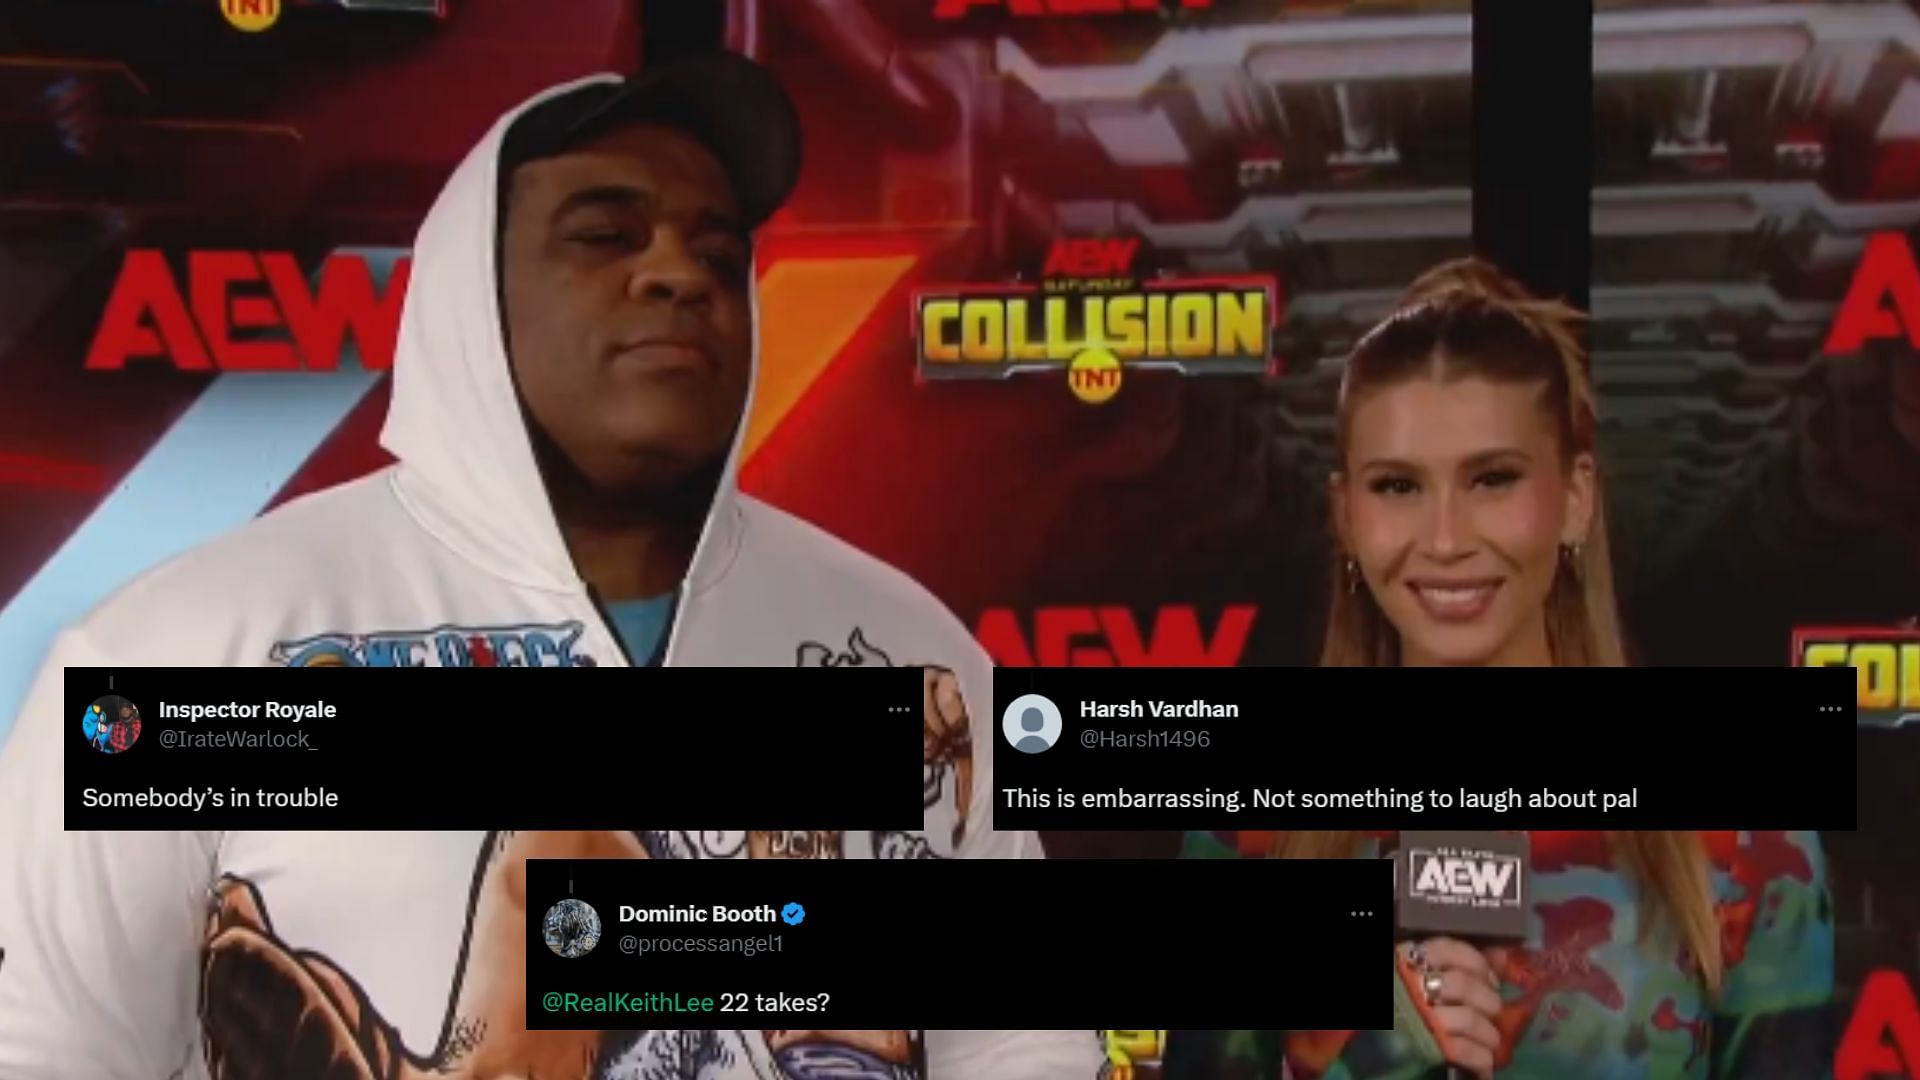 Keith Lee and AEW backstage interviewer Lexy Nair